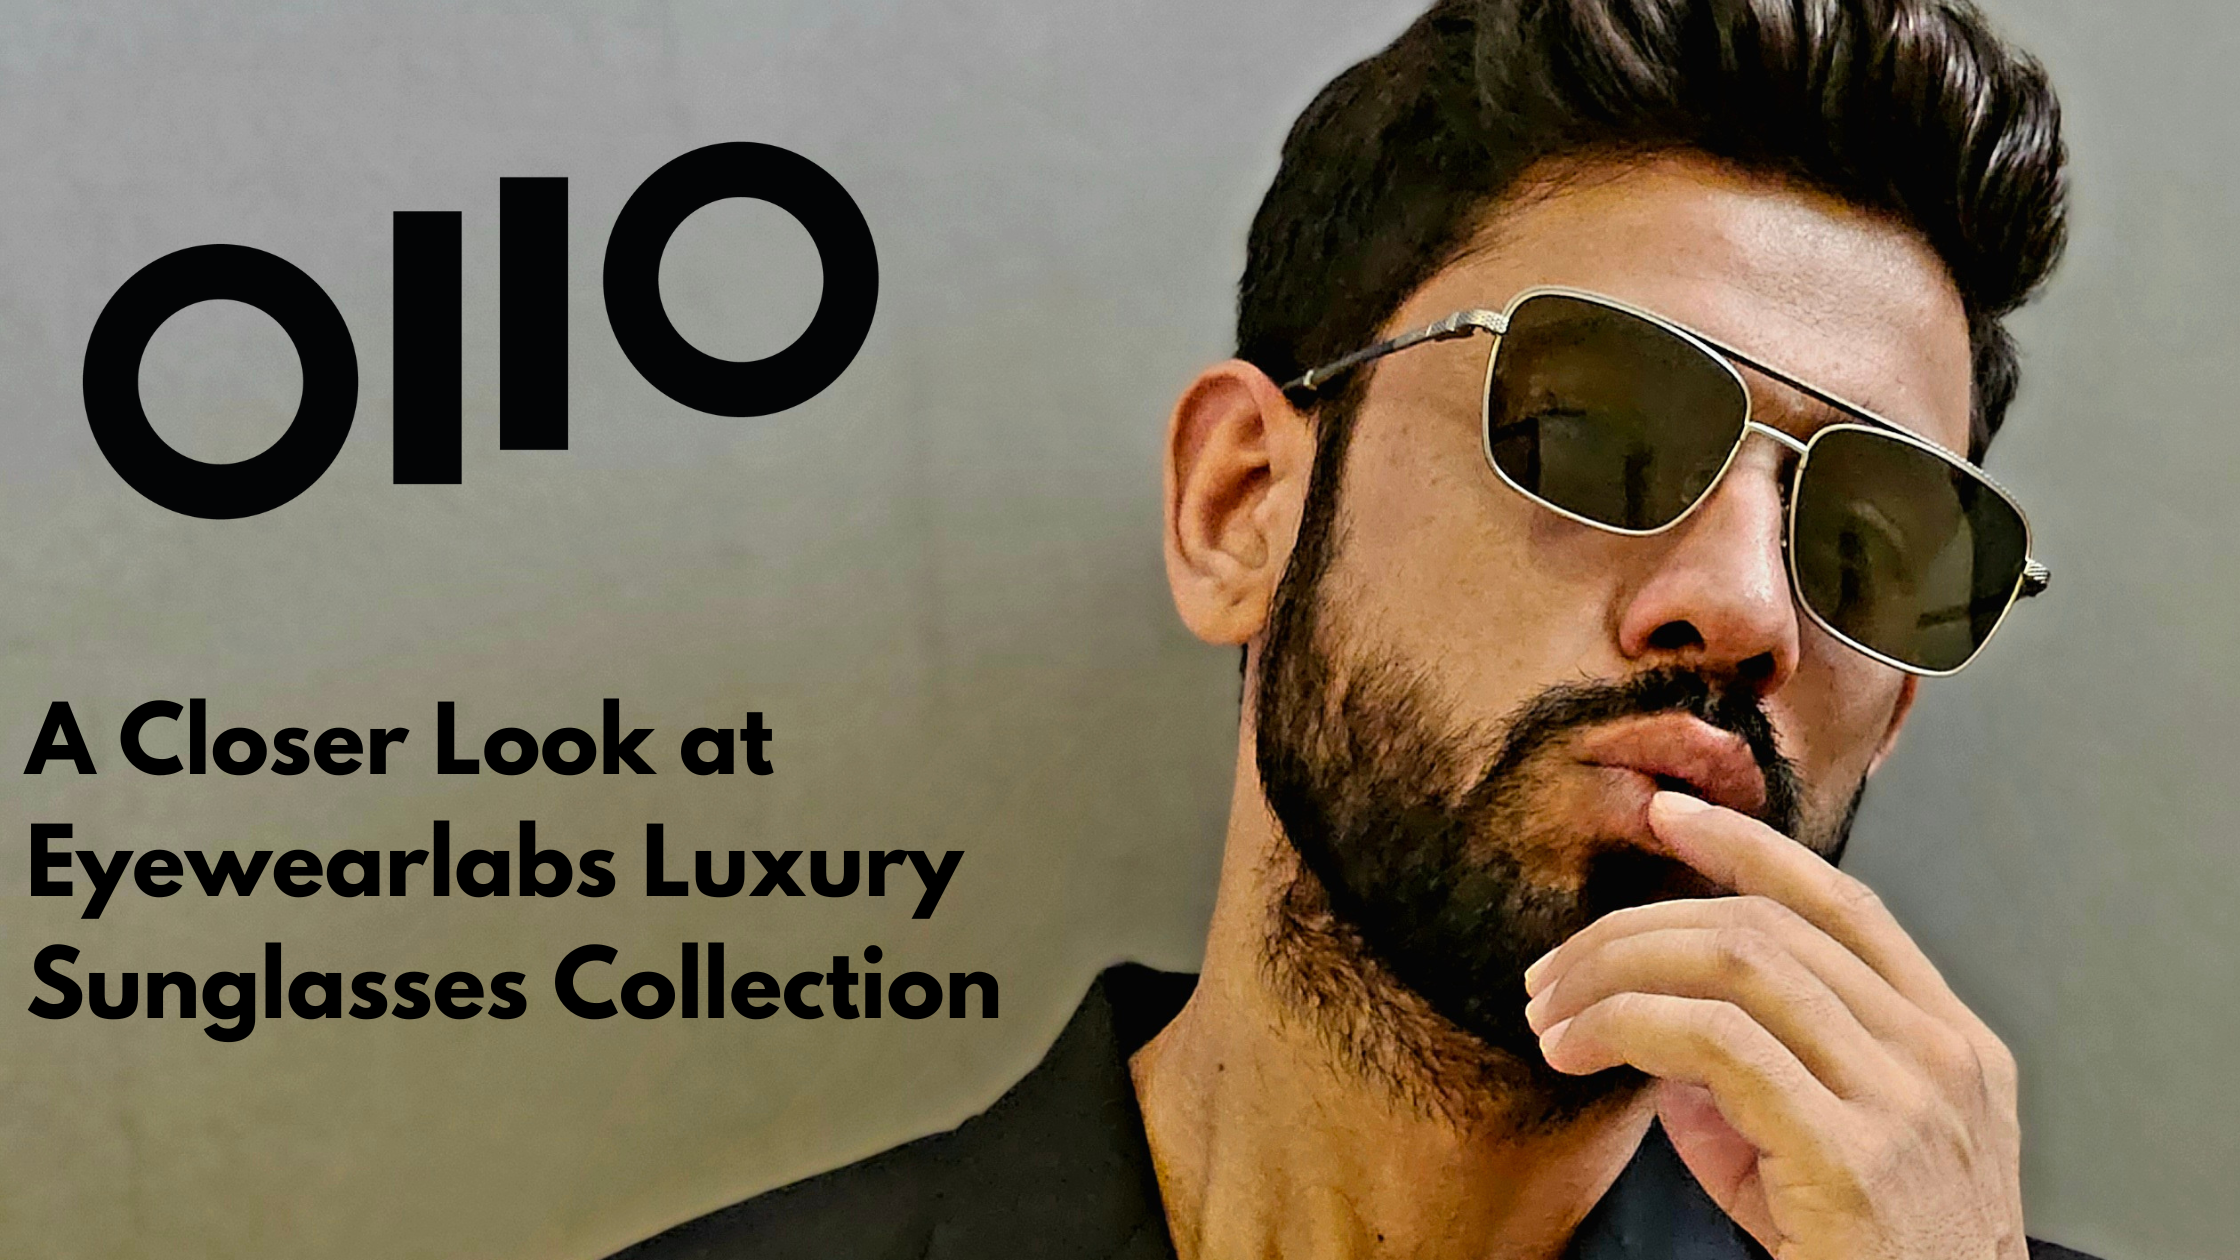 A Closer Look at EyewearLabs Luxury Sunglasses Collection